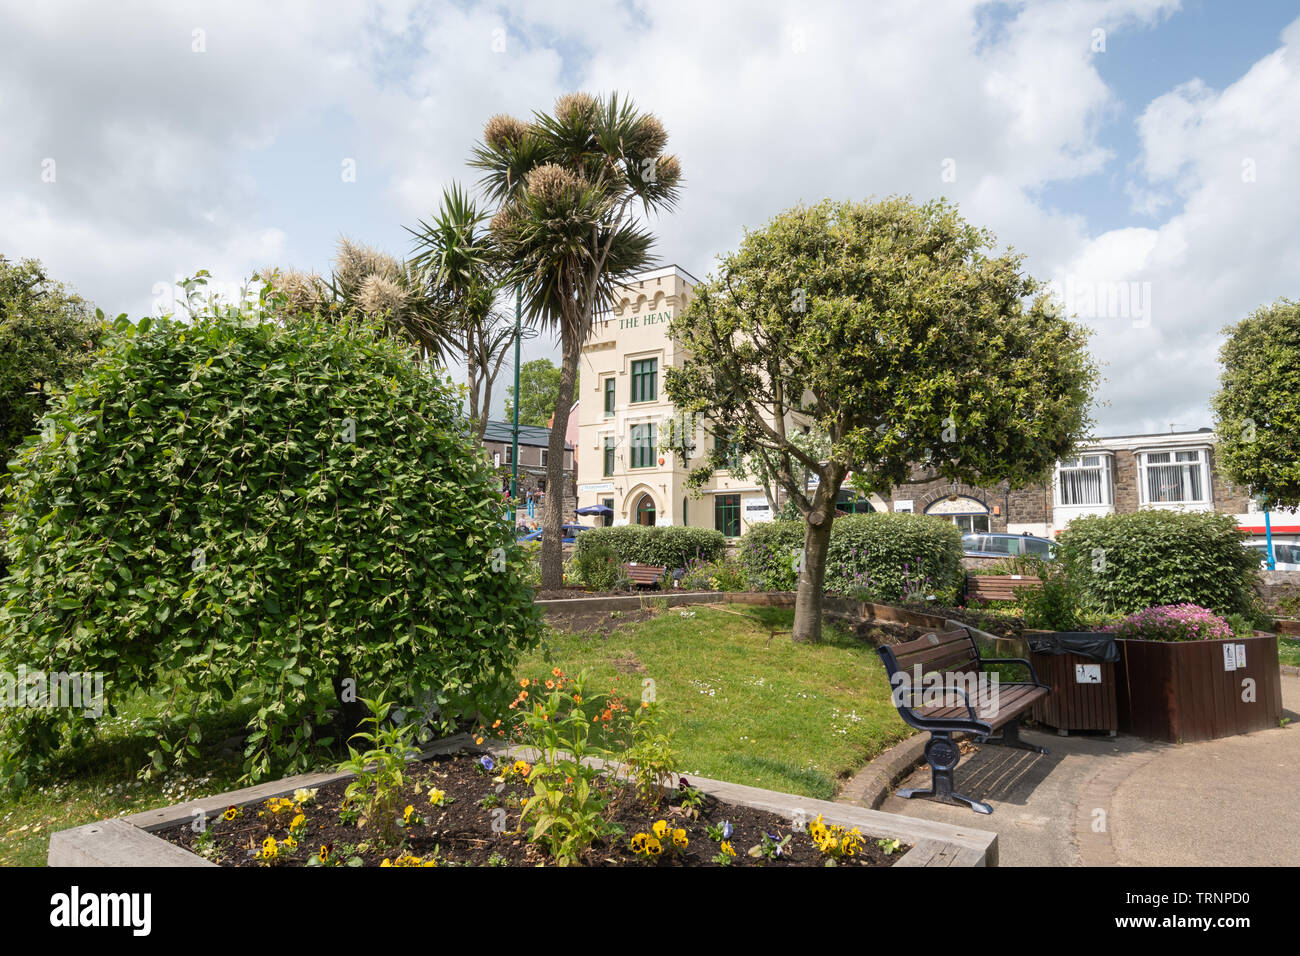 The sensory garden in Saundersfoot, Pembrokeshire, Wales, during summer with the Hean Castle pub in the background Stock Photo